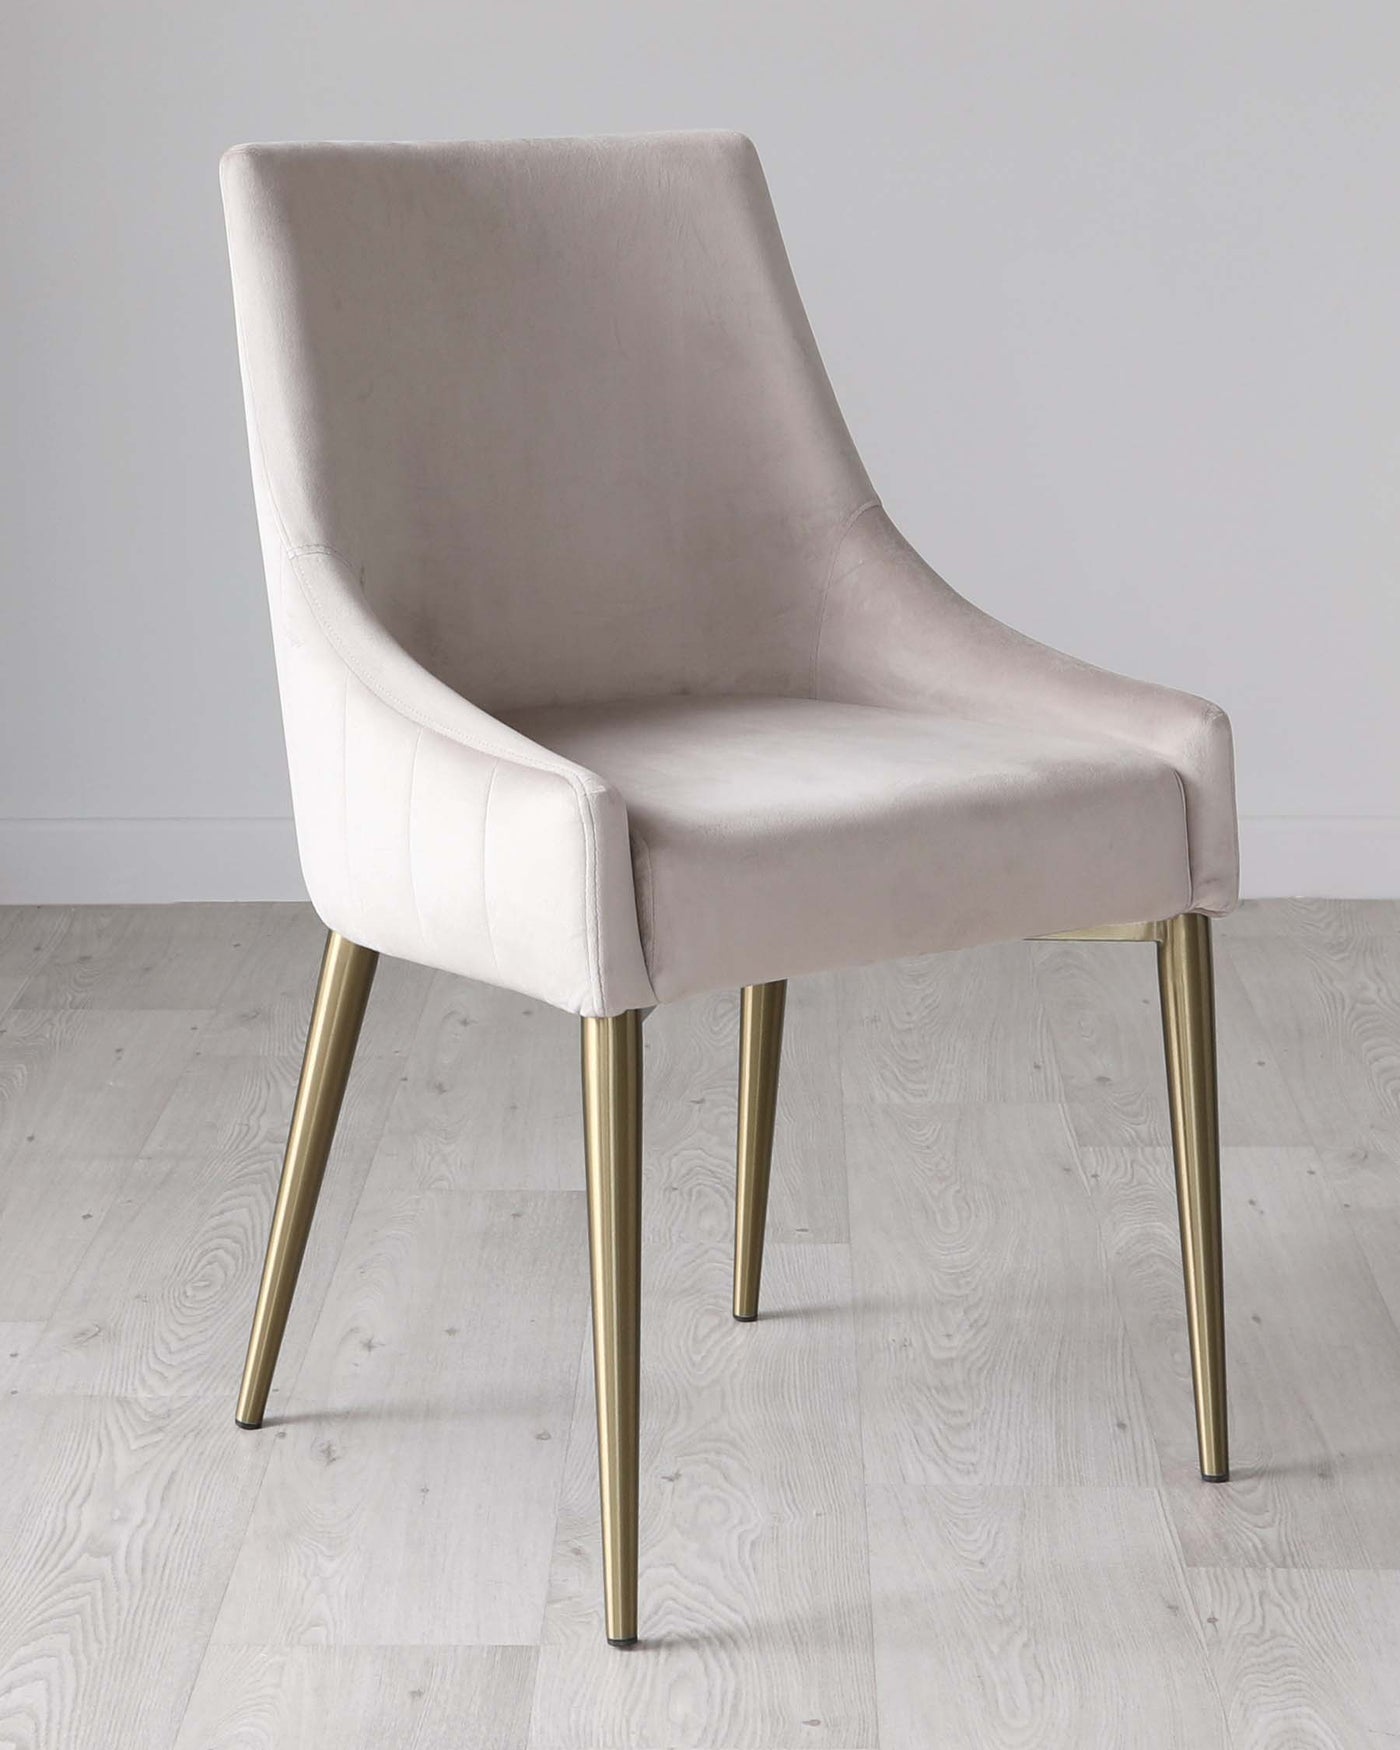 Juliana Champagne Velvet With Brushed Brass Dining Chair - Set of 2